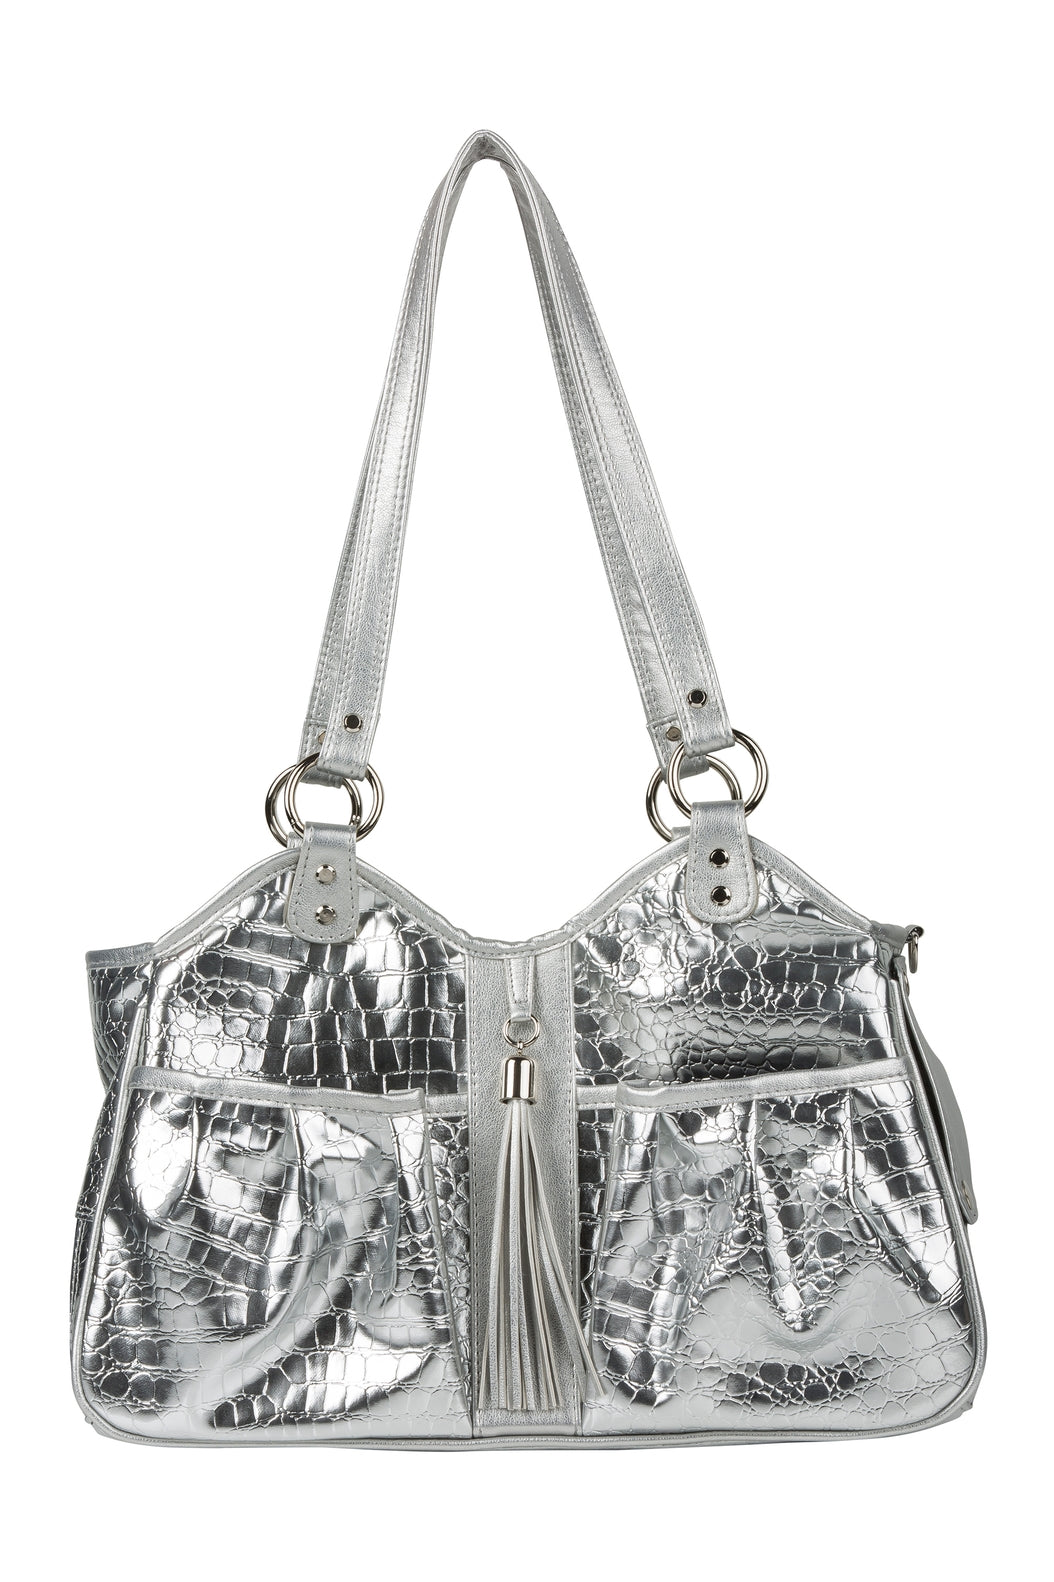 Petote Metro Dog Carrier - Silver Faux Gator With Tassel